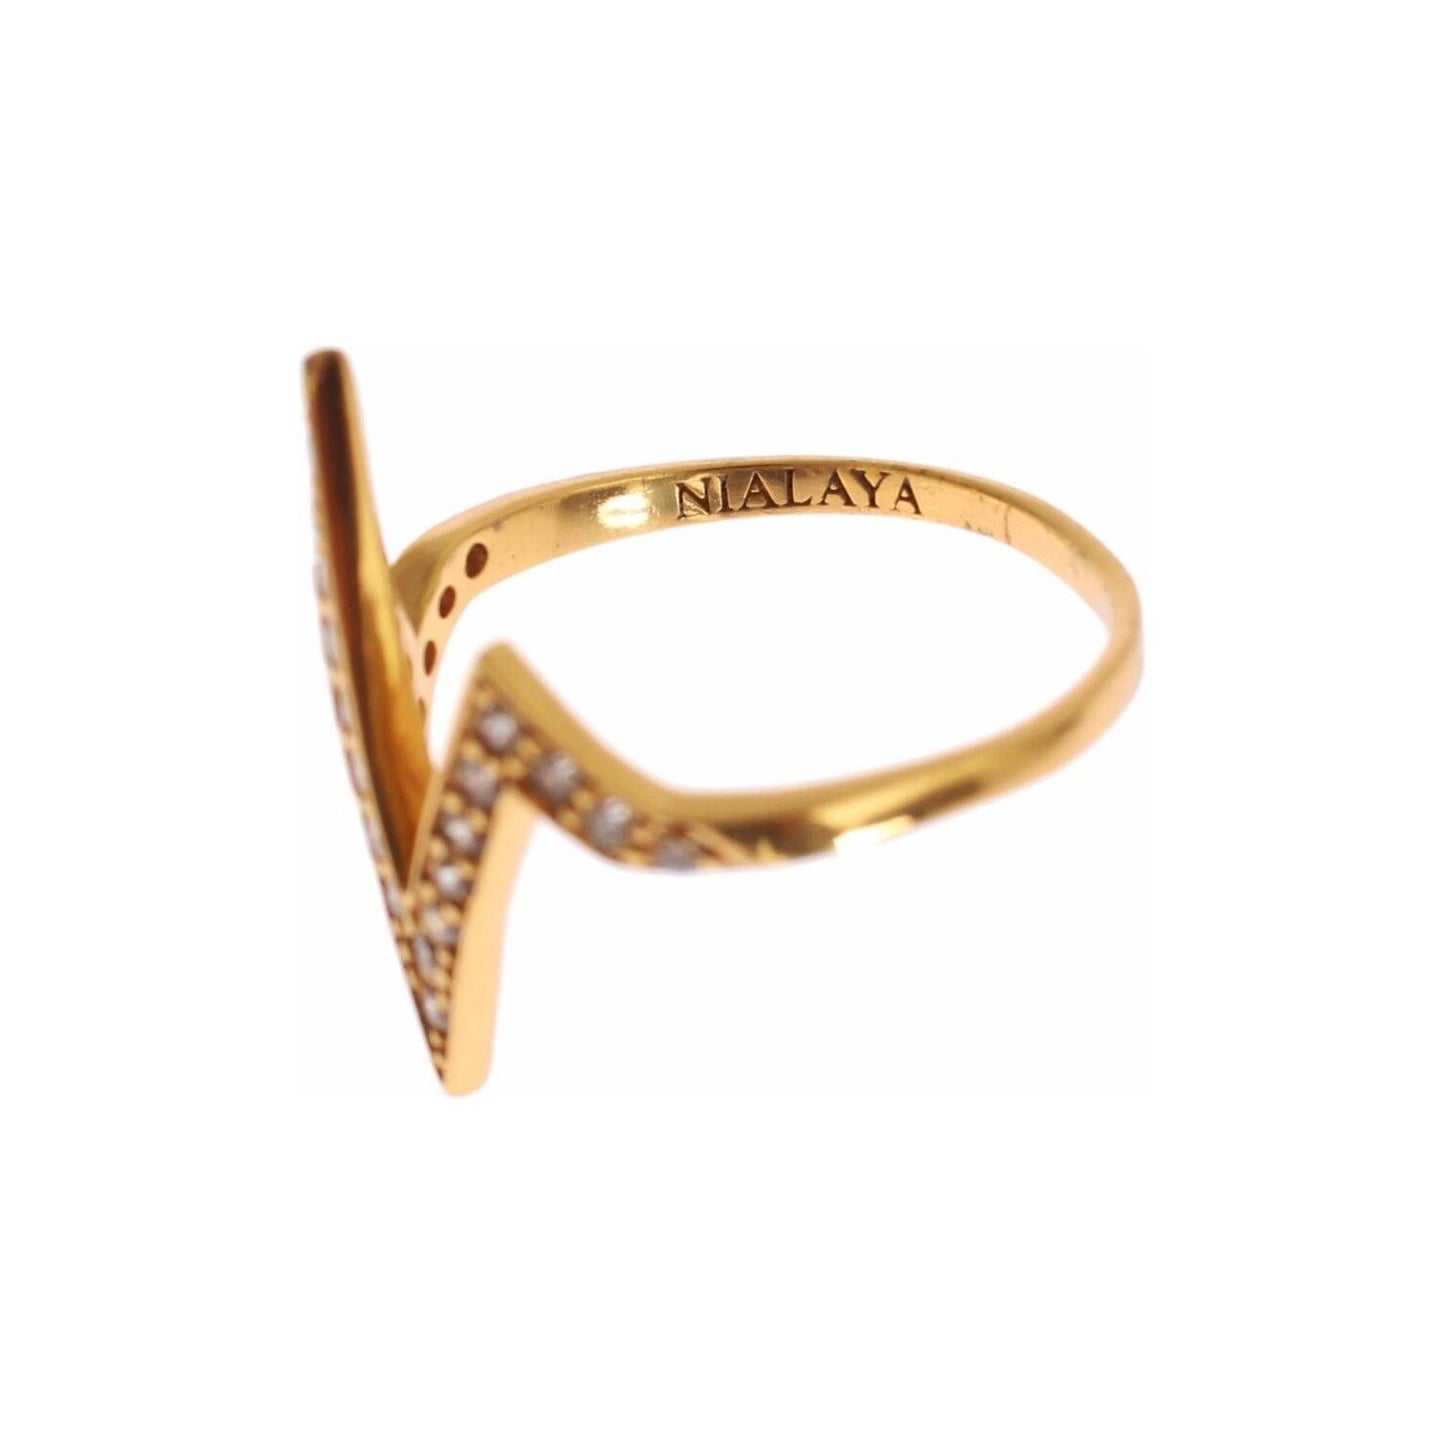 Nialaya Glamorous Gold Plated Sterling Silver Ring gold-925-silver-womens-clear-cz-18k-ring